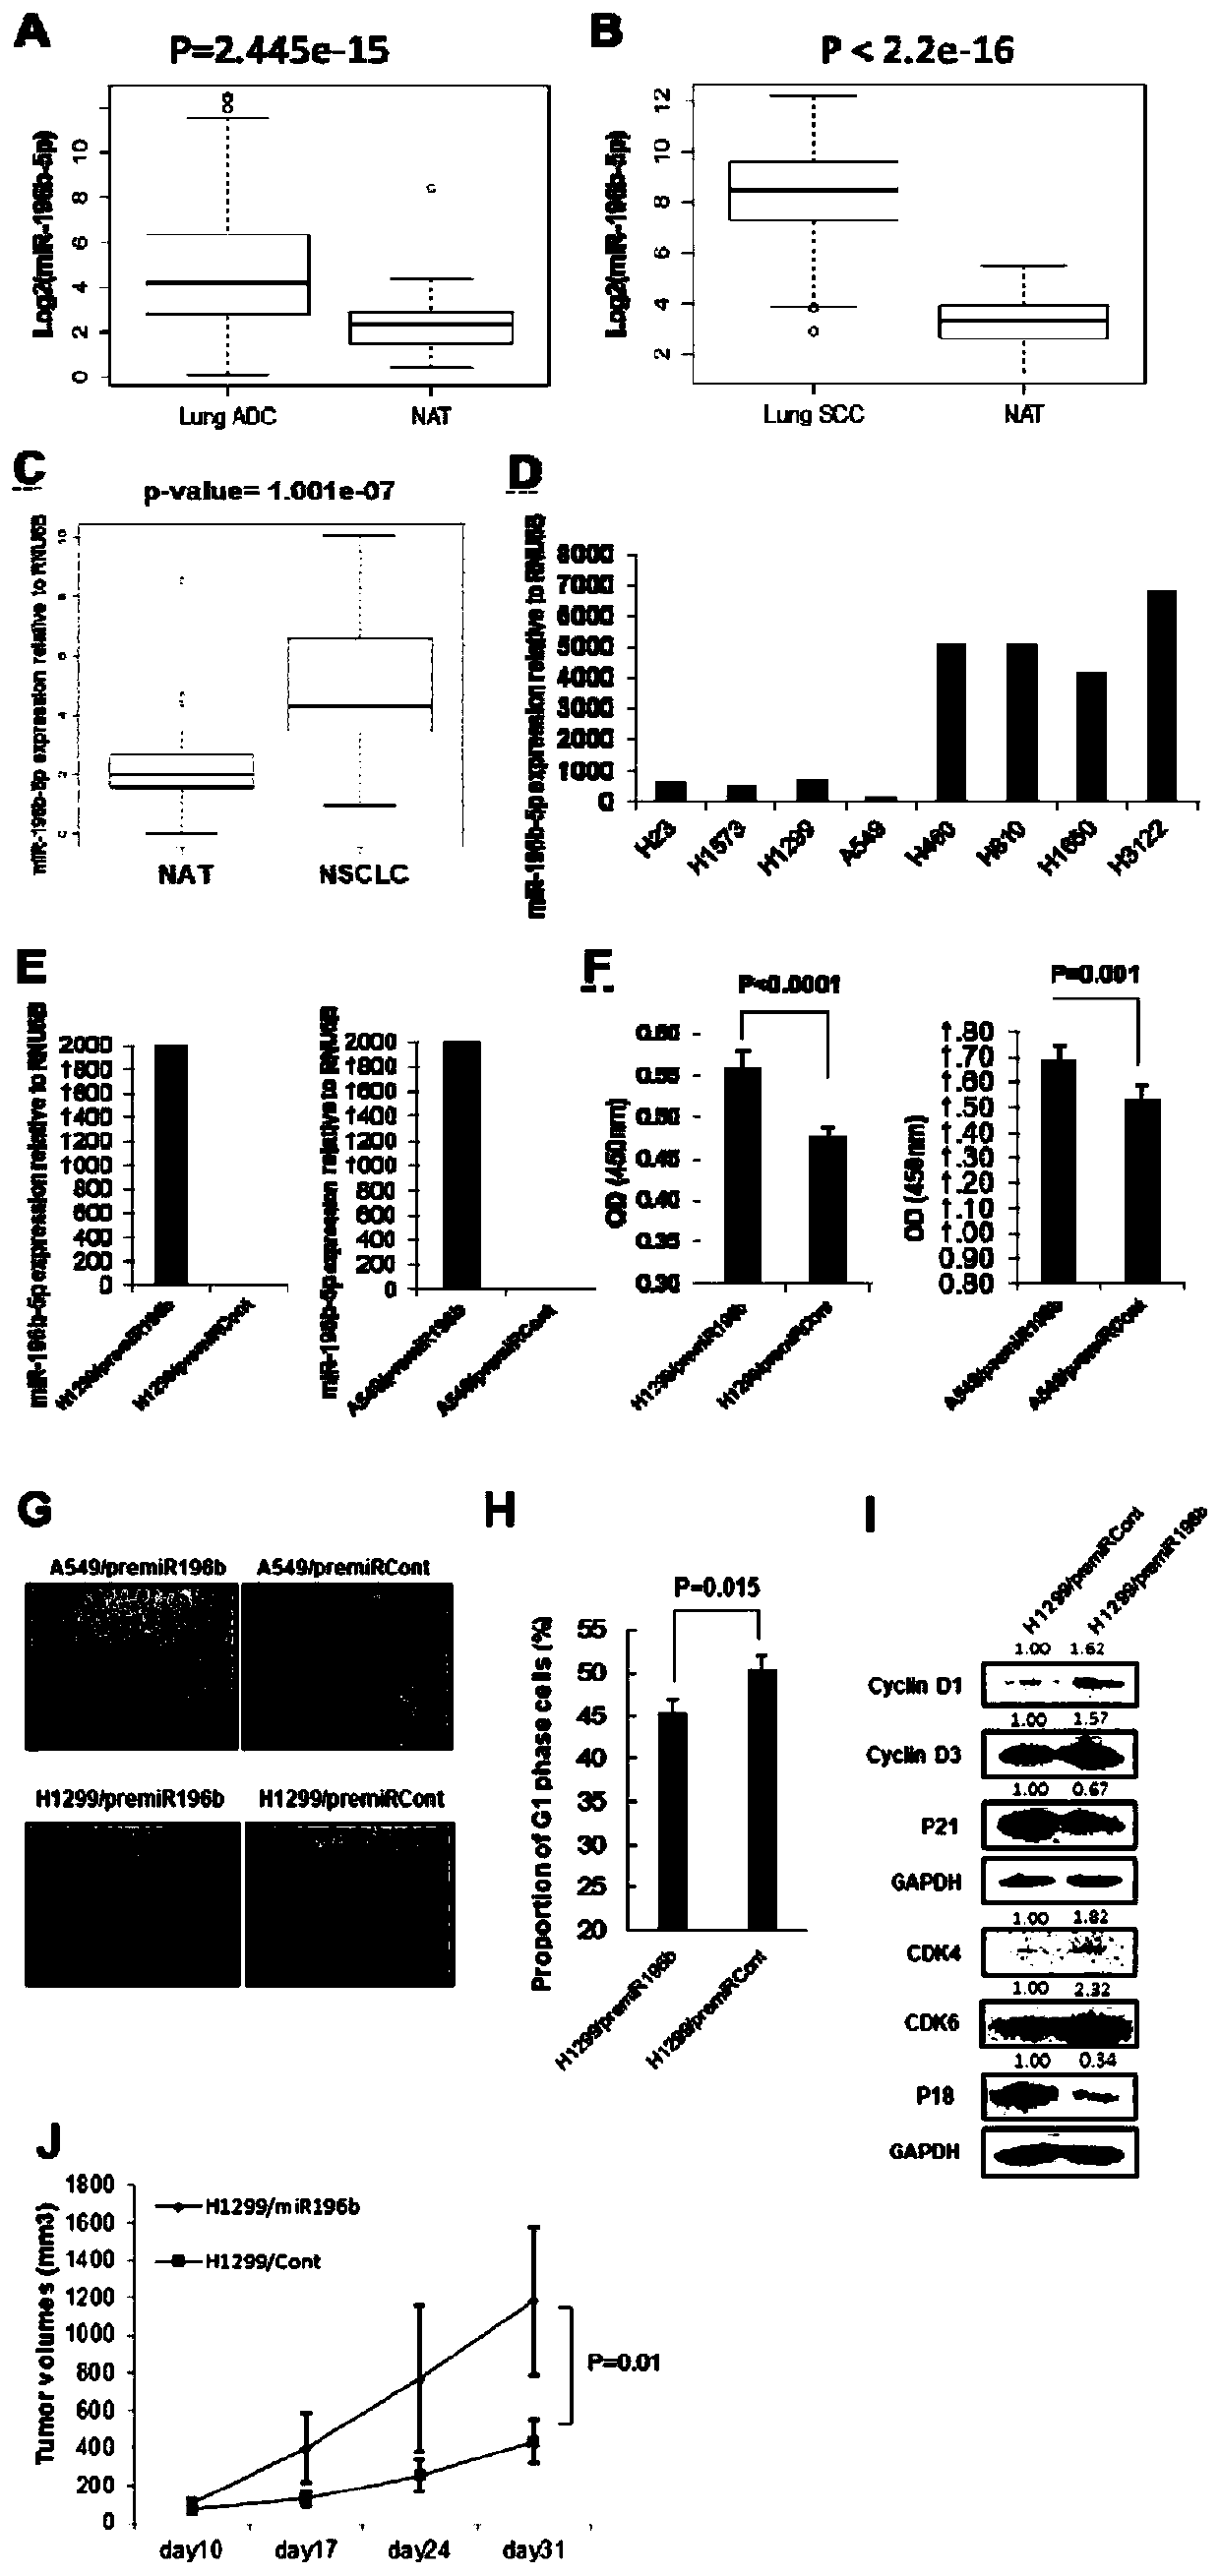 Application of miRNA-196b as non-small cell lung cancer molecular marker and treatment target